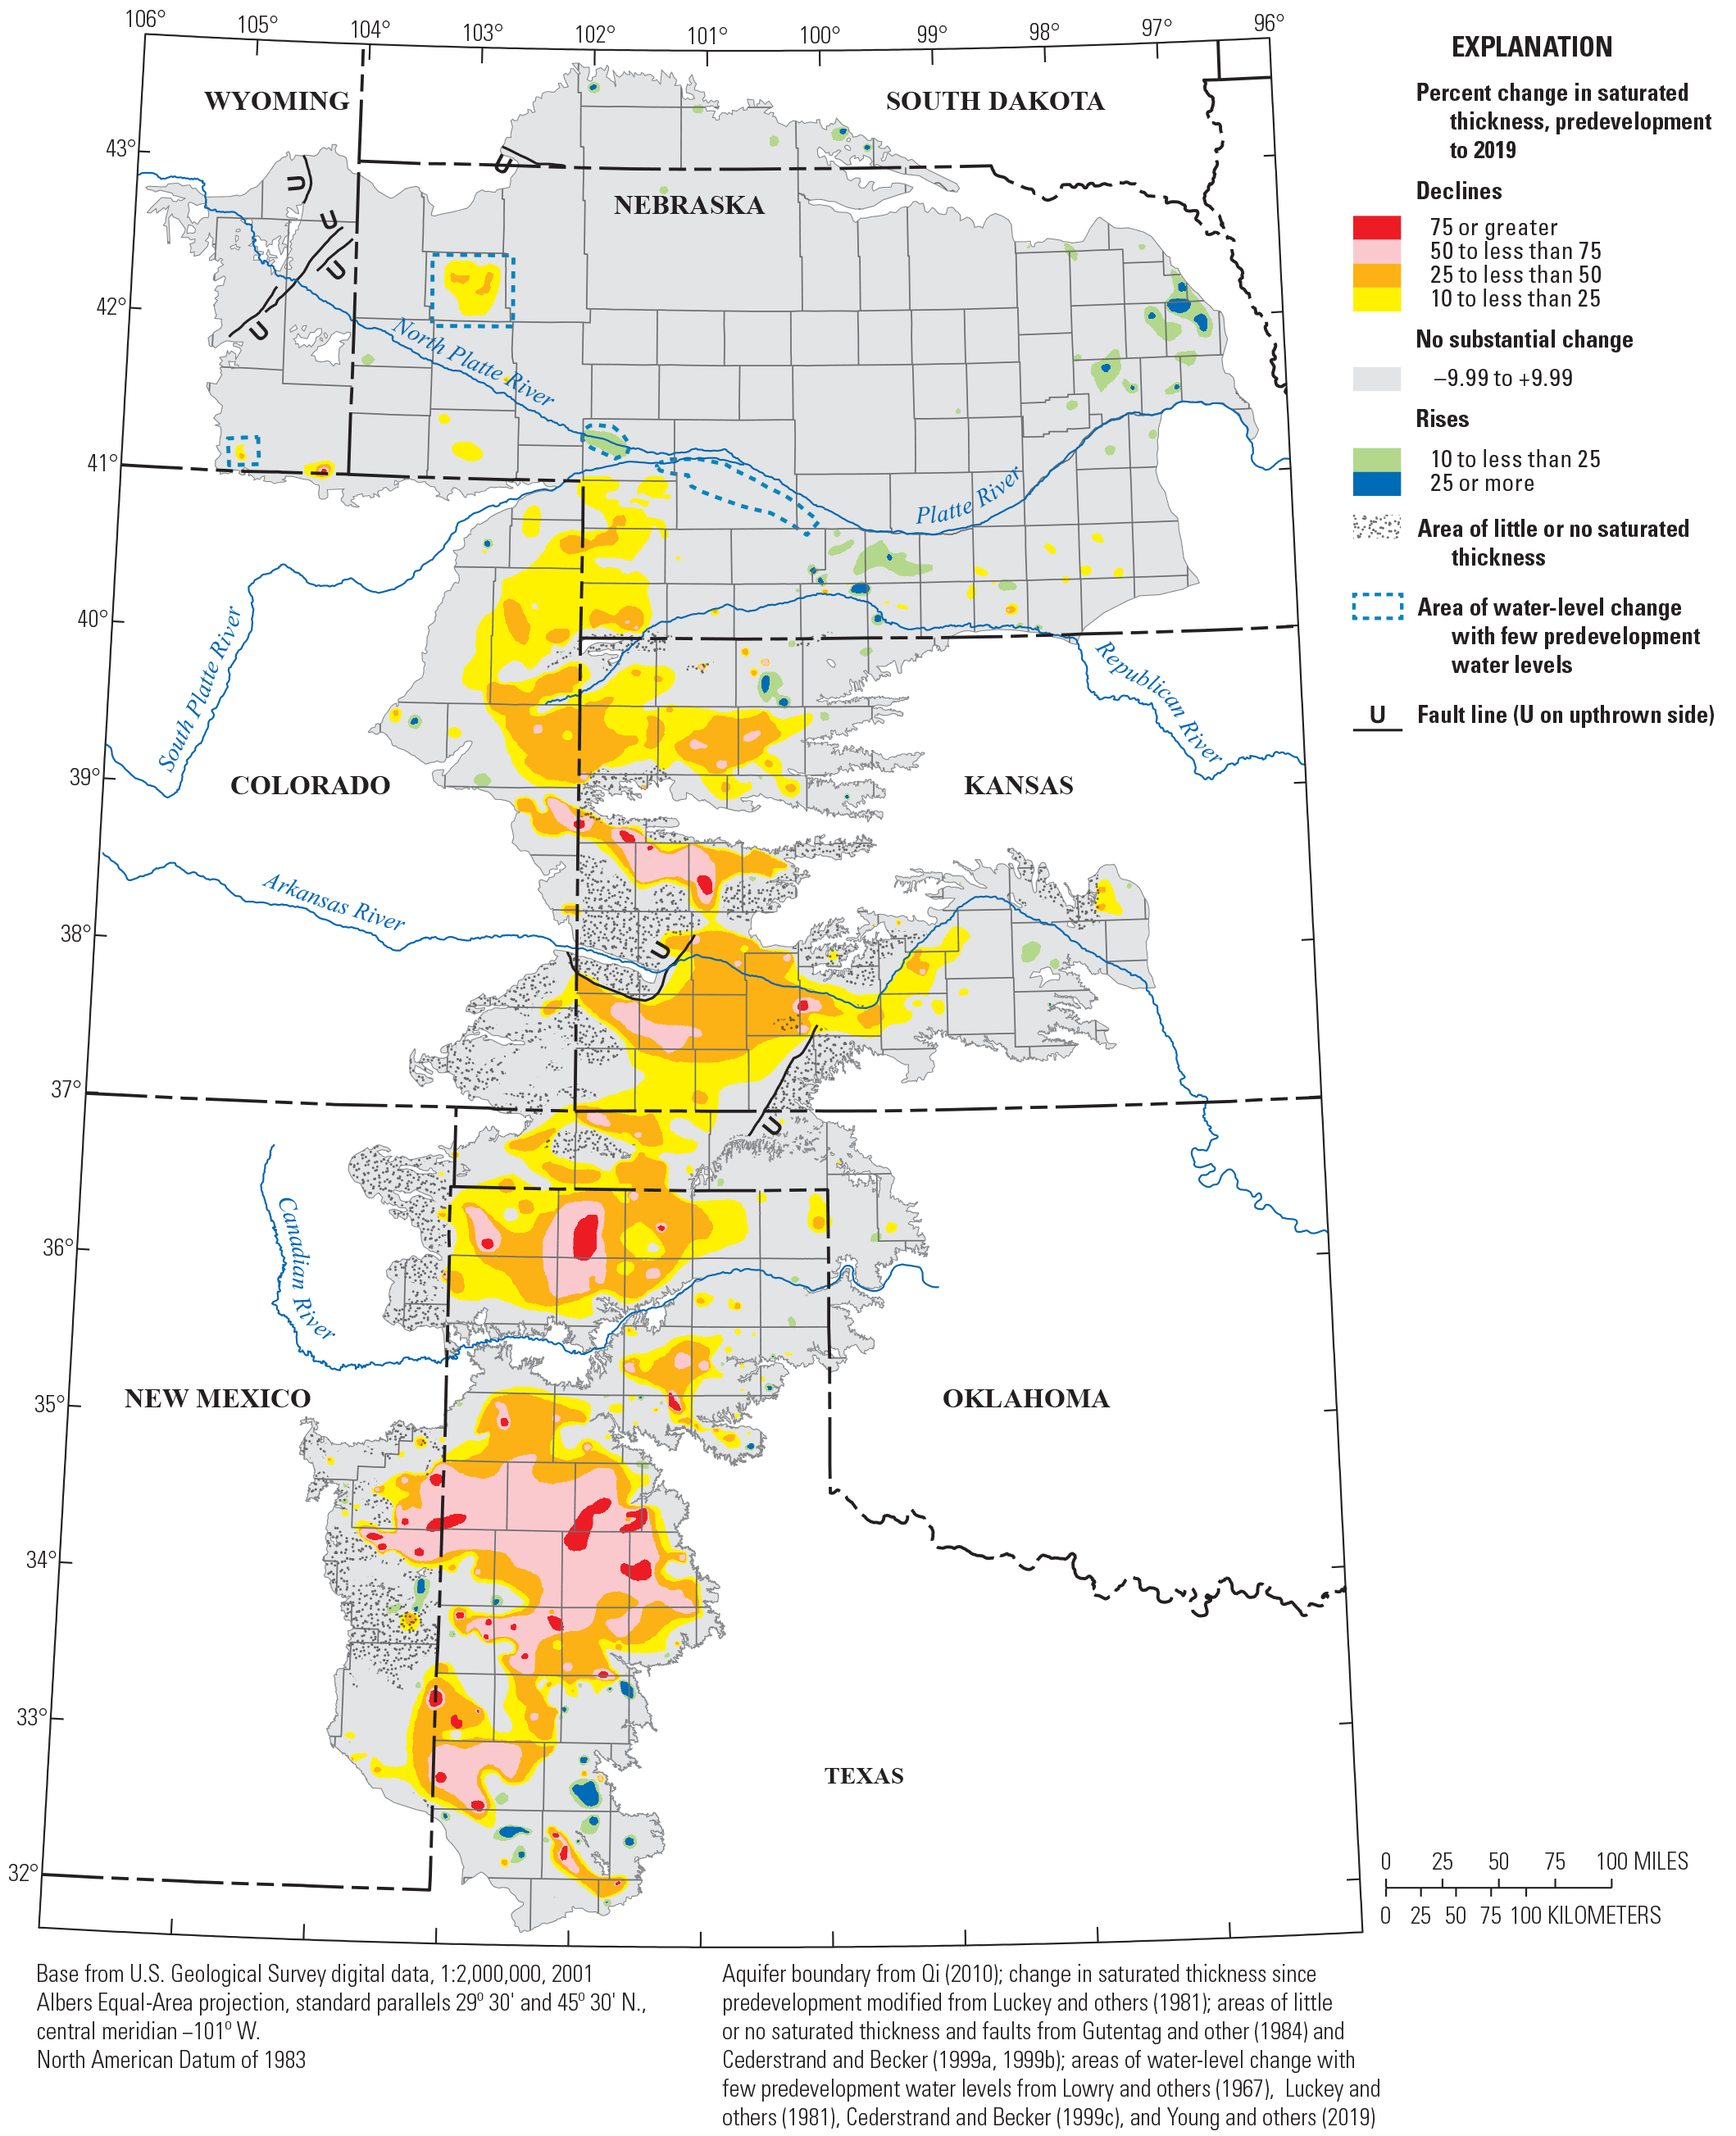 Saturated thickness declines, rises, and areas of no change, predevelopment to 2019,
                        High Plains aquifer, in percent.